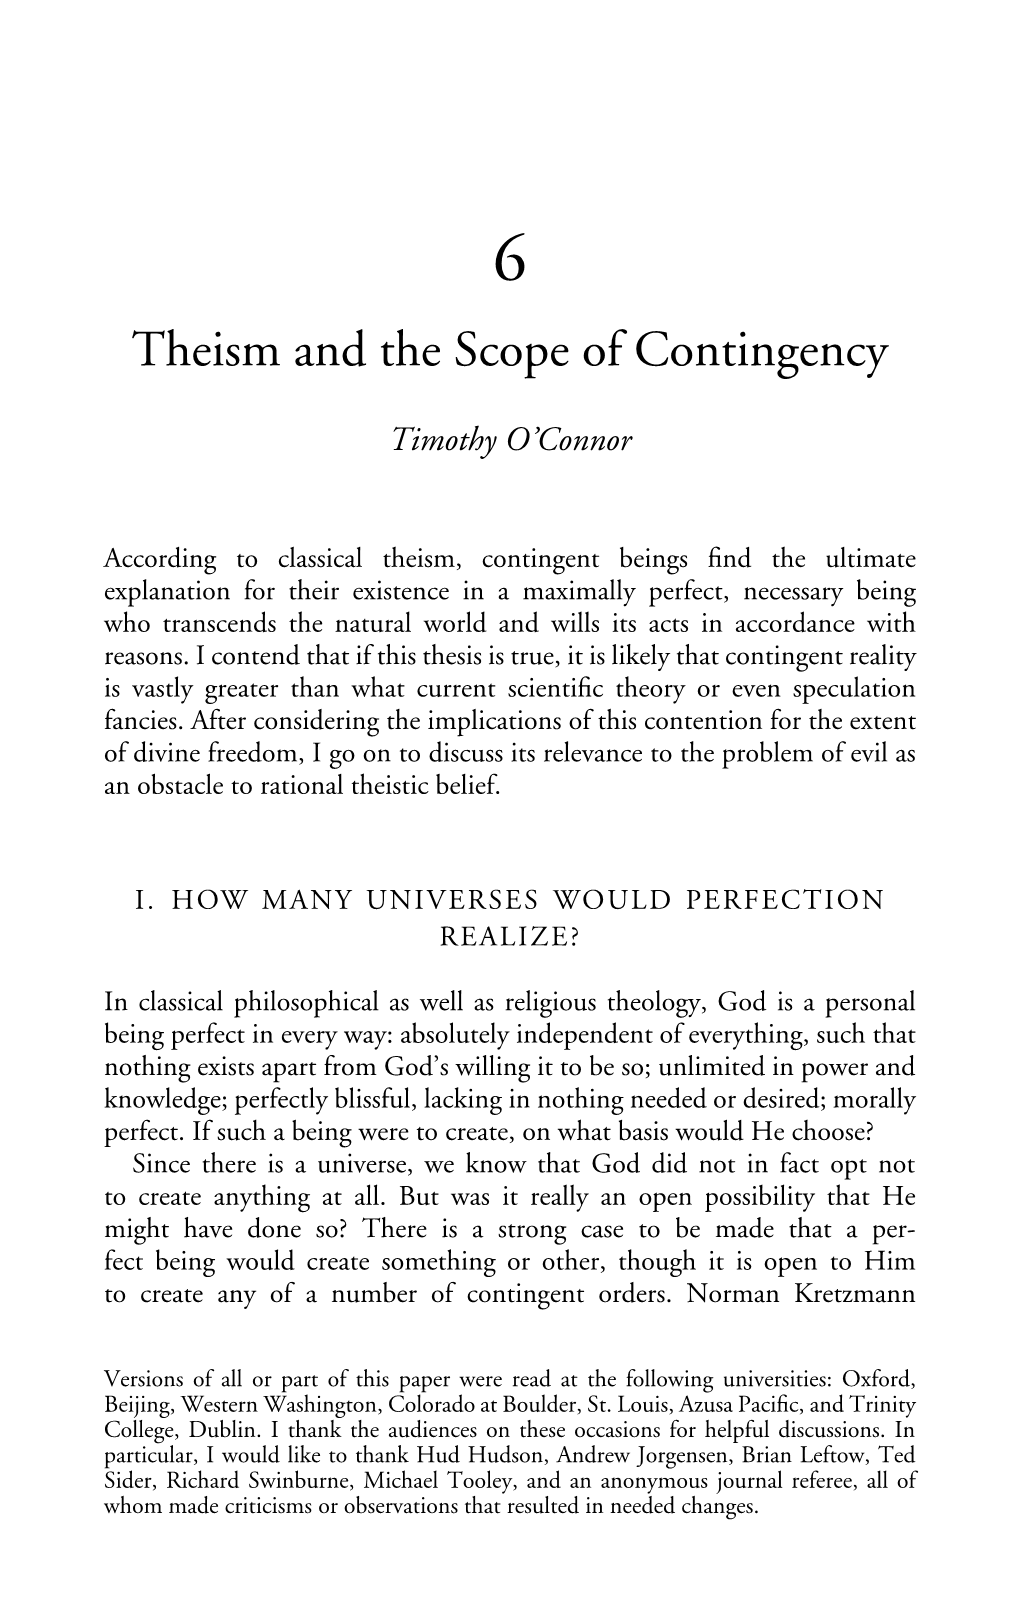 Theism and the Scope of Contingency